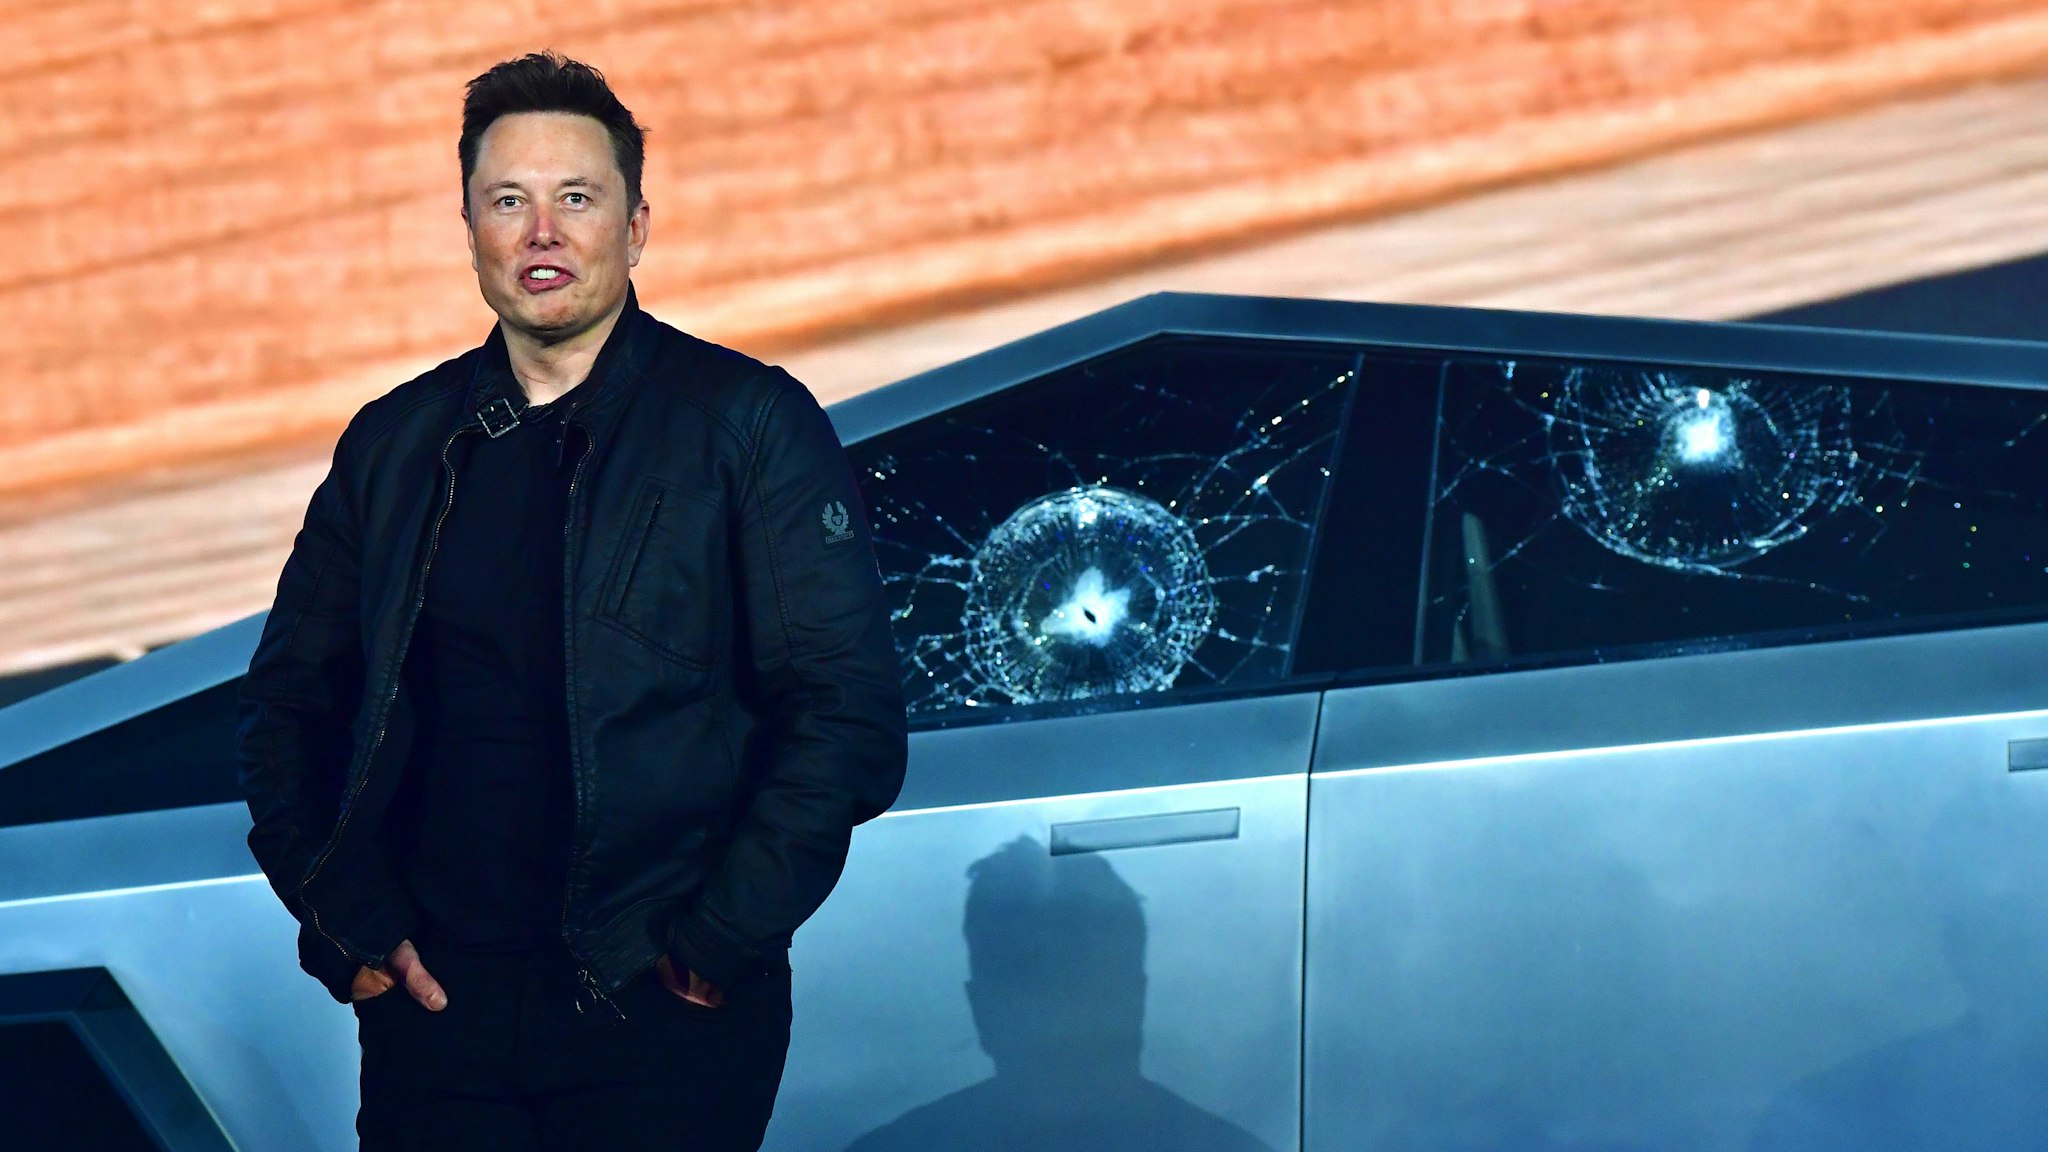 Tesla co-founder and CEO Elon Musk stands in front of the shattered windows of the newly unveiled all-electric battery-powered Tesla's Cybertruck at Tesla Design Center in Hawthorne, California on November 21, 2019.